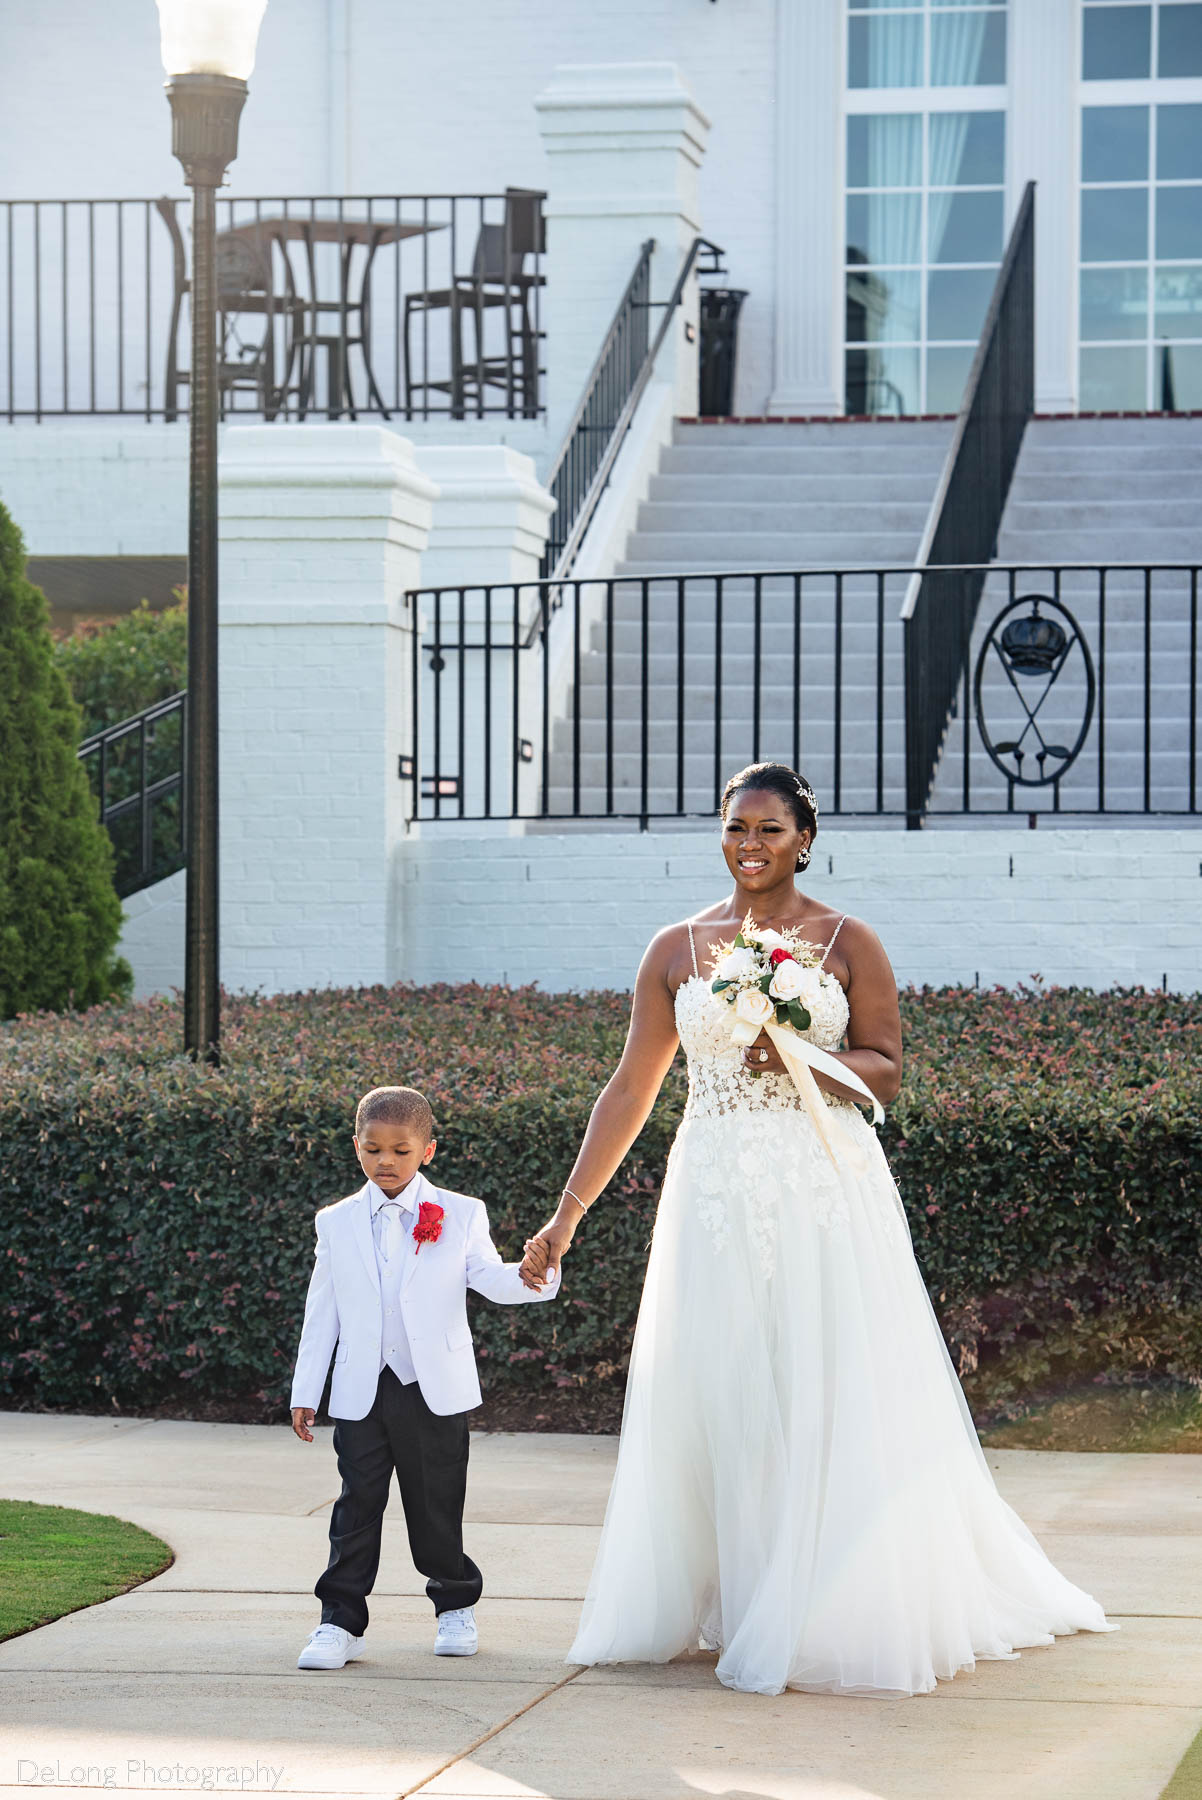 The bride walking down the aisle with one of her twin sons during the wedding ceremony at at Providence Country Club by Charlotte wedding photographers DeLong Photography